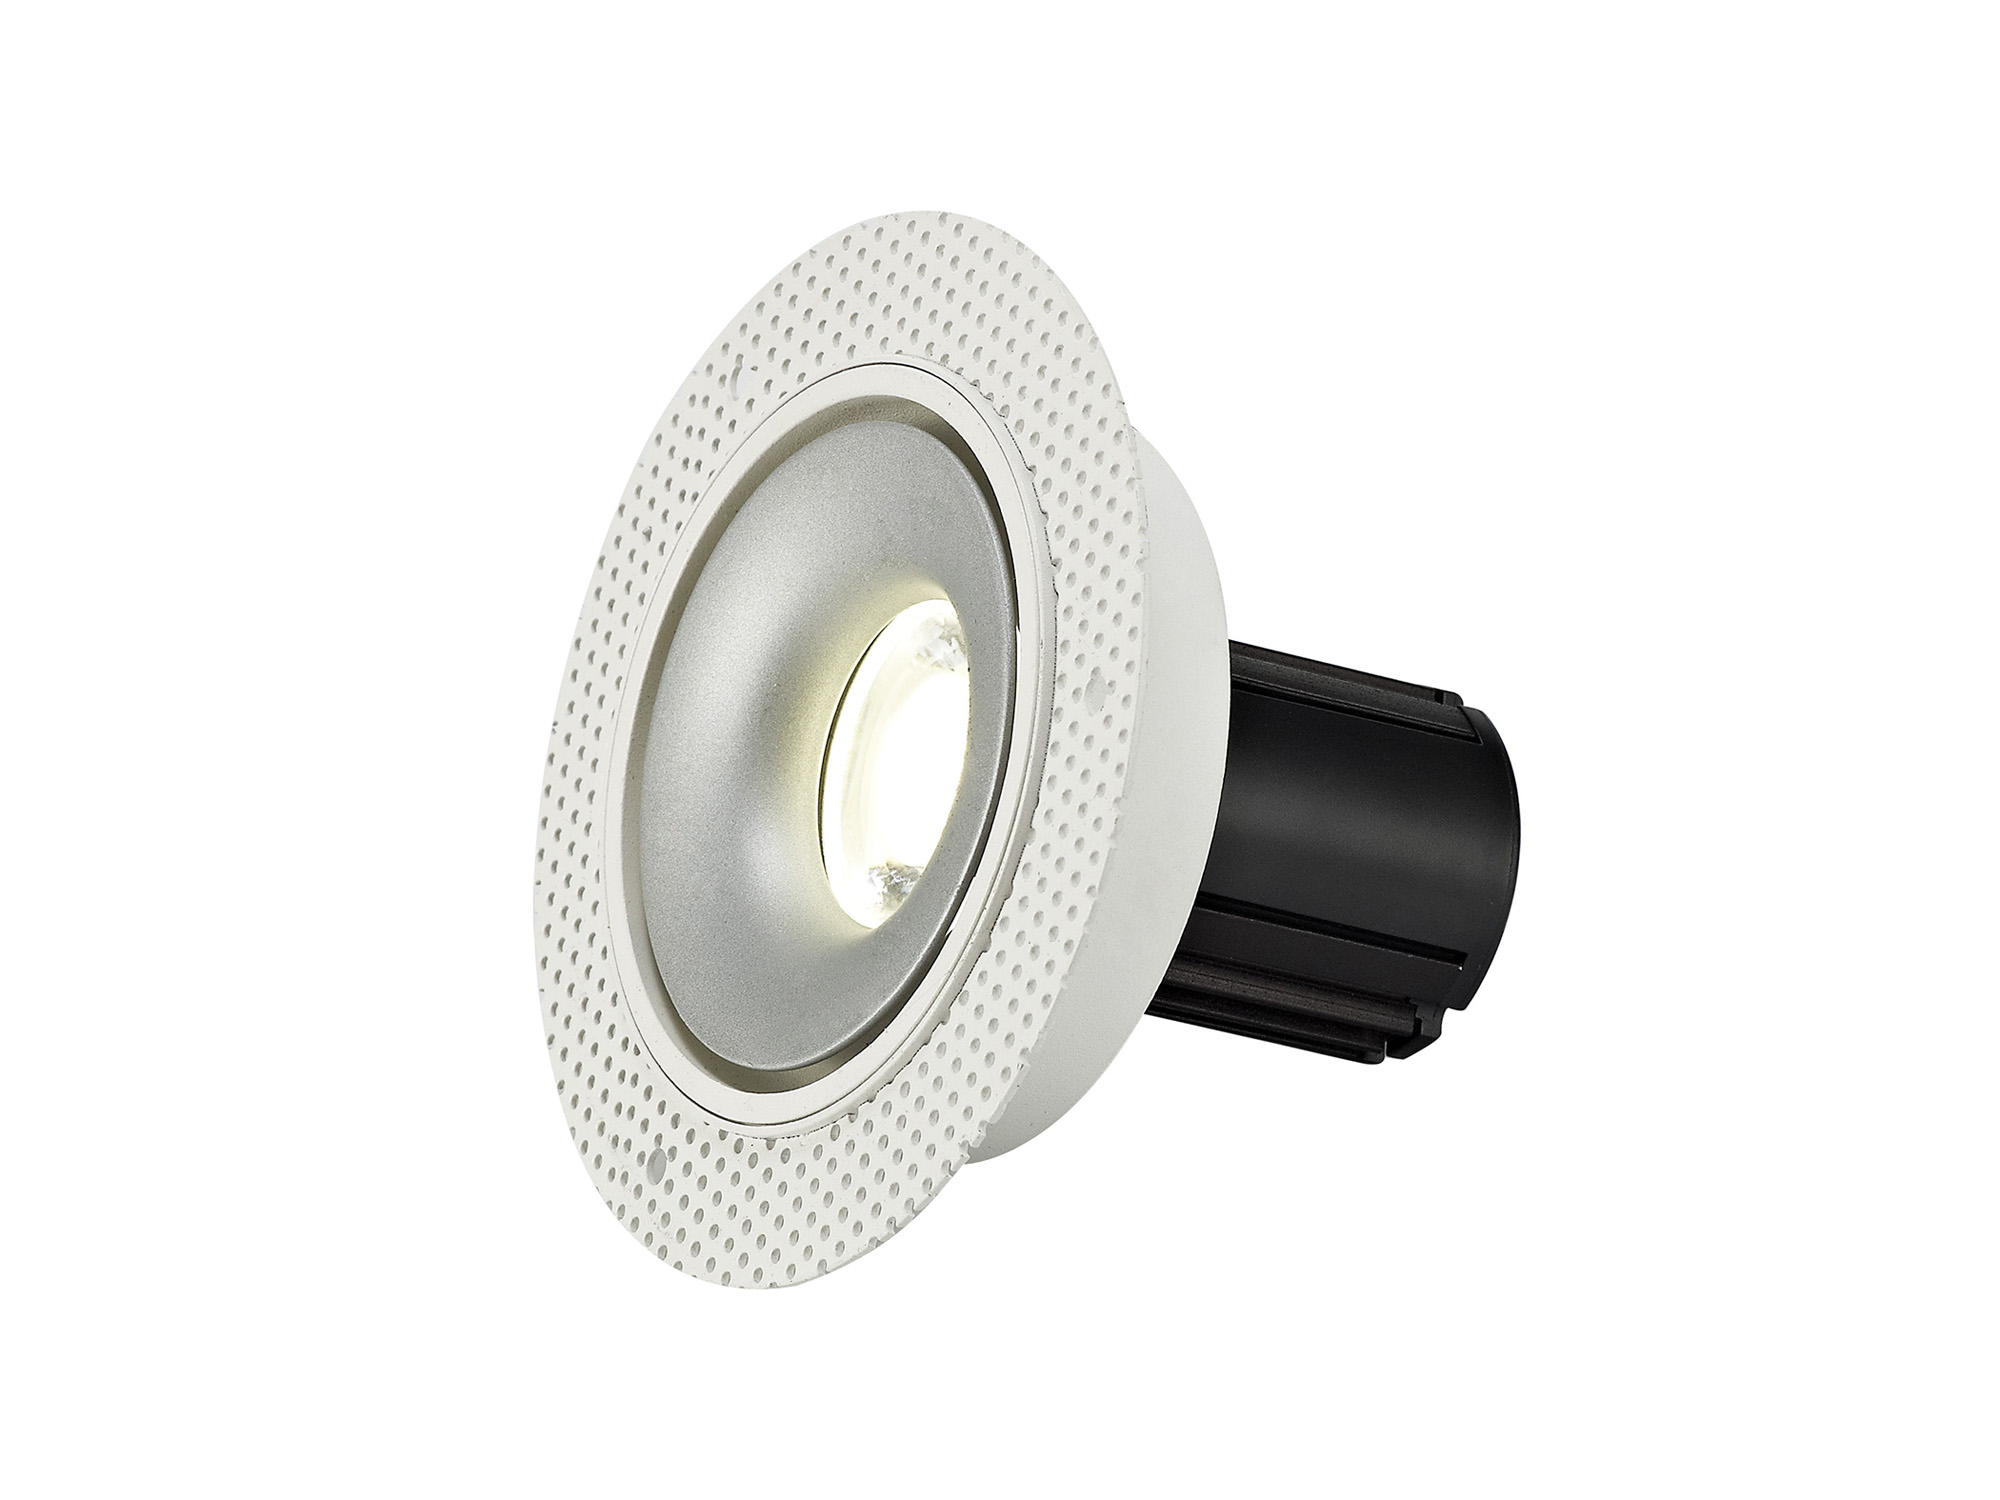 DM201114  Bolor T 10 Tridonic Powered 10W 4000K 810lm 36° CRI>90 LED Engine White/Silver Trimless Fixed Recessed Spotlight, IP20